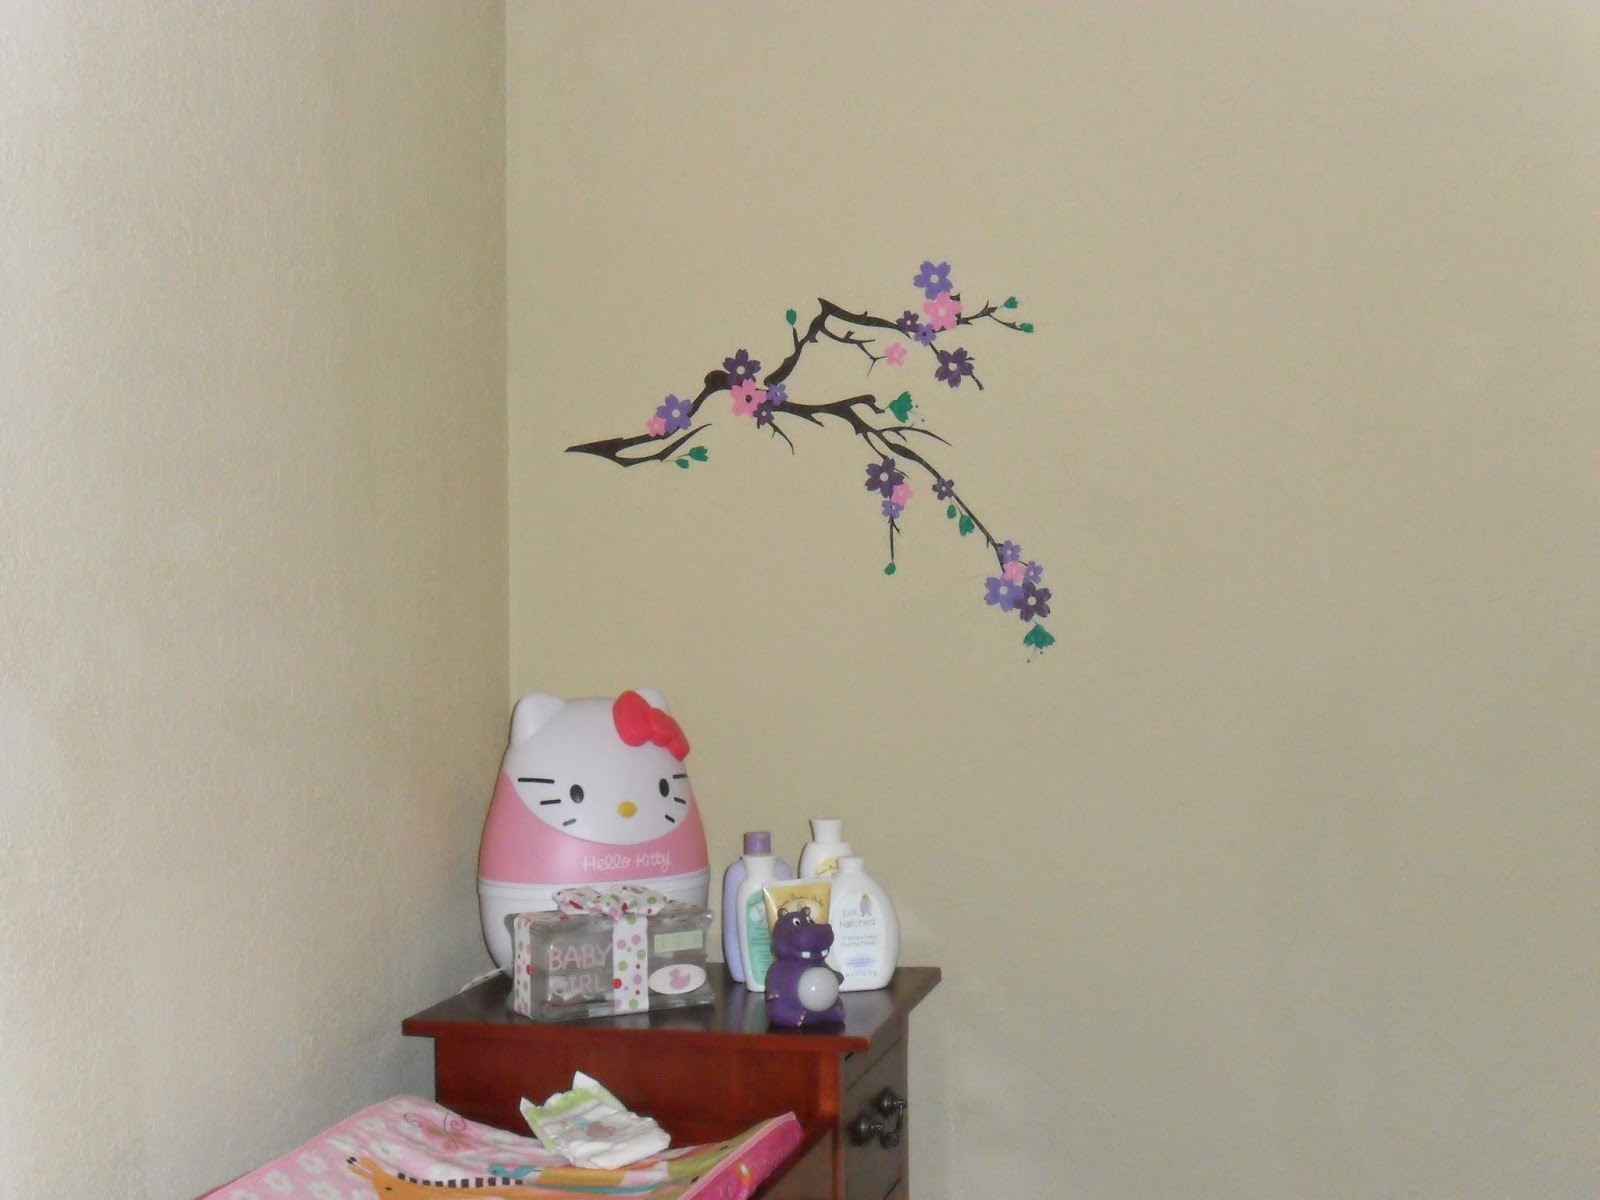 Vinyl Disorder Wall Decals Review (Blu me away or Pink of me Event)